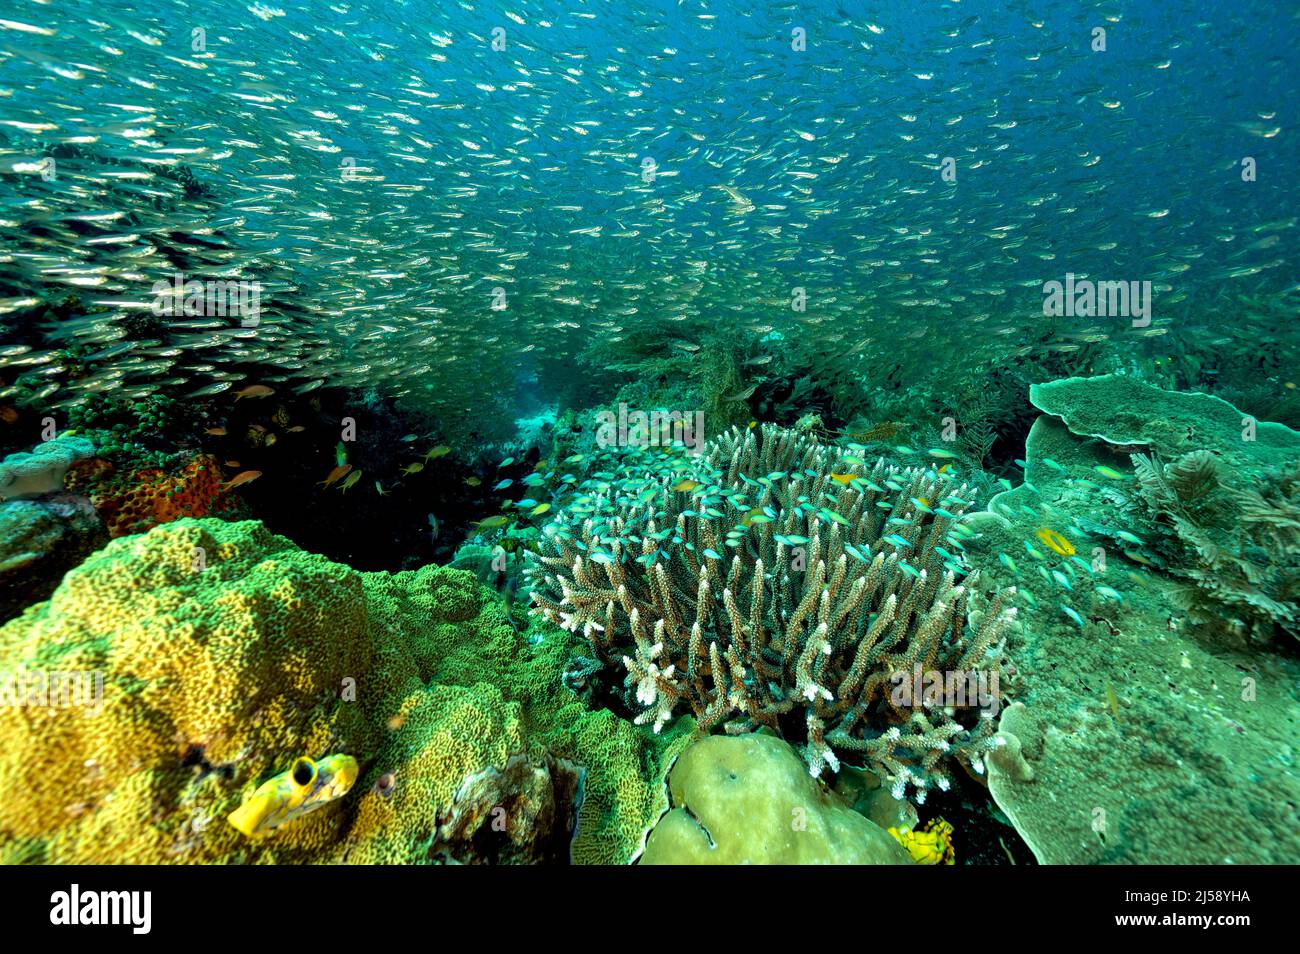 Reef scenic with glass fishes, Raja Ampat Indonesia Stock Photo